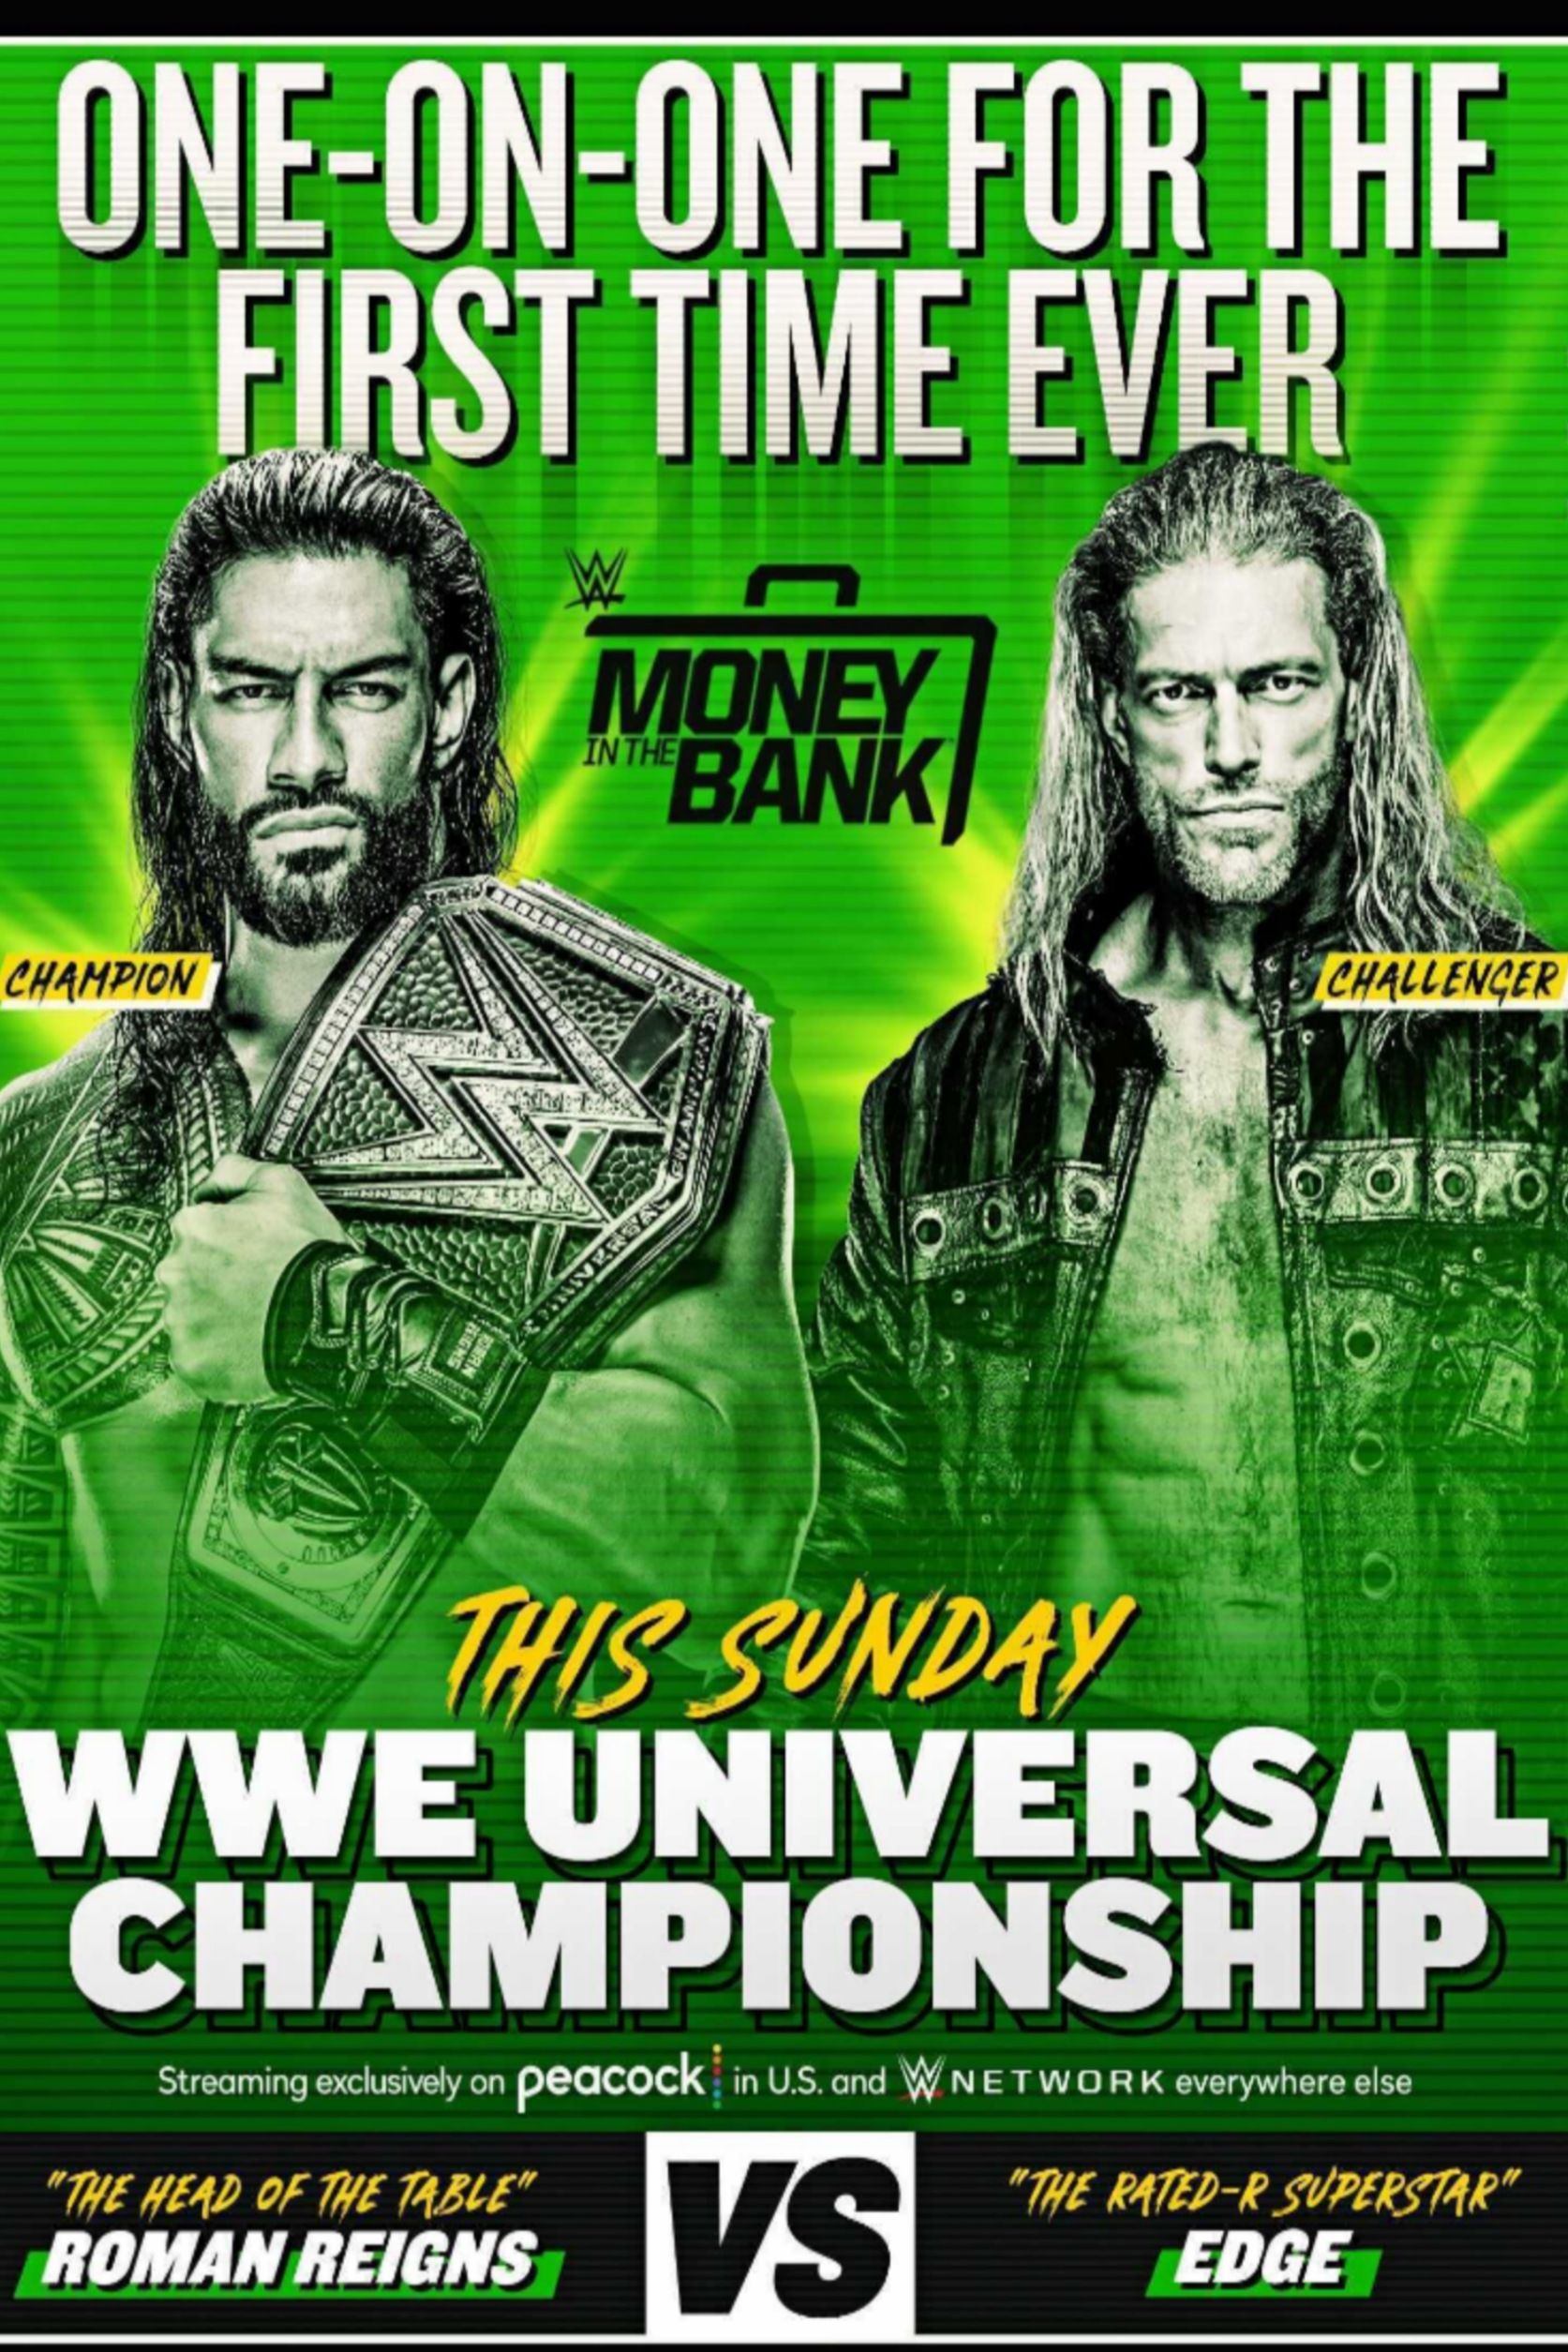 Wwe Mony In The Bank 2021 Hindienglish 16765 Poster.jpg